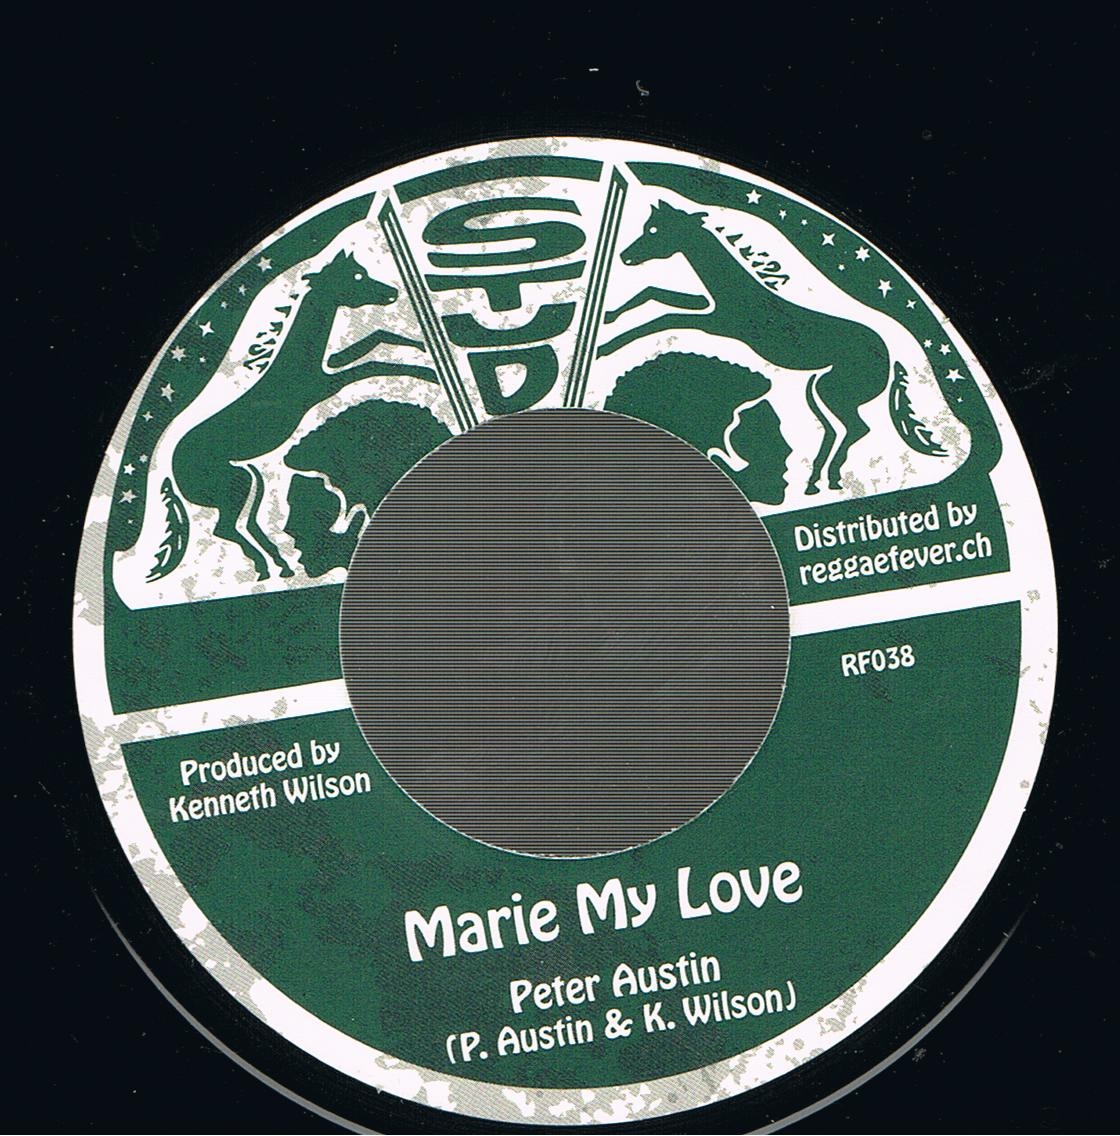 Peter Austin - Marie My Love / The Clarendonians - Darling Forever (7")